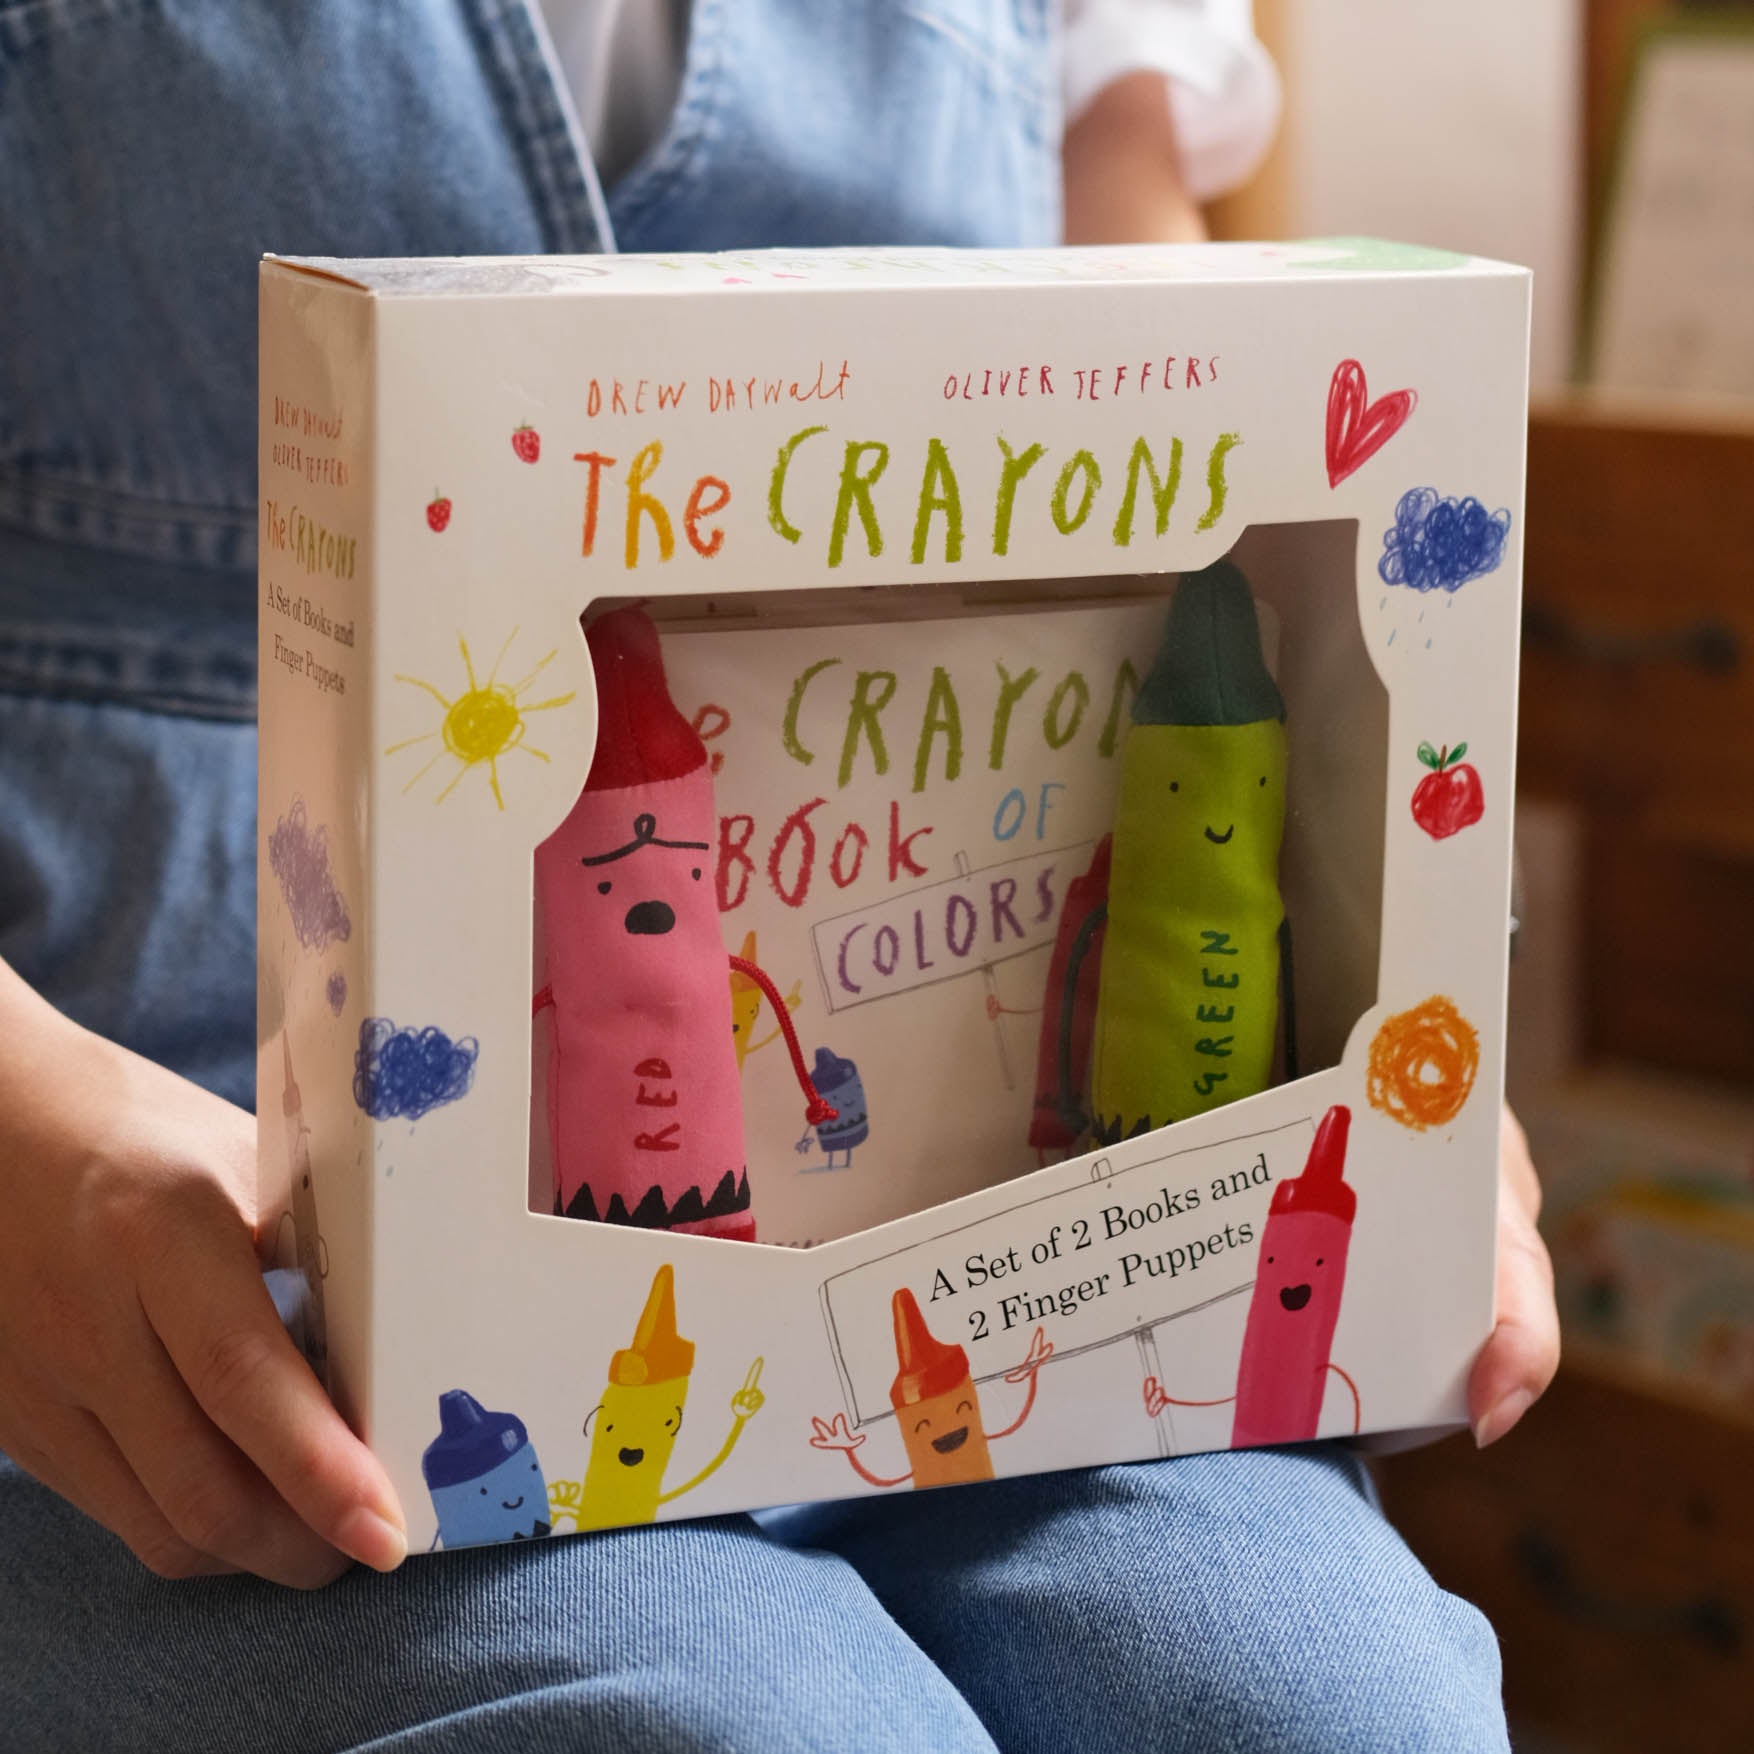 The Crayons: A Set of Books and Finger Puppets (Novelty)